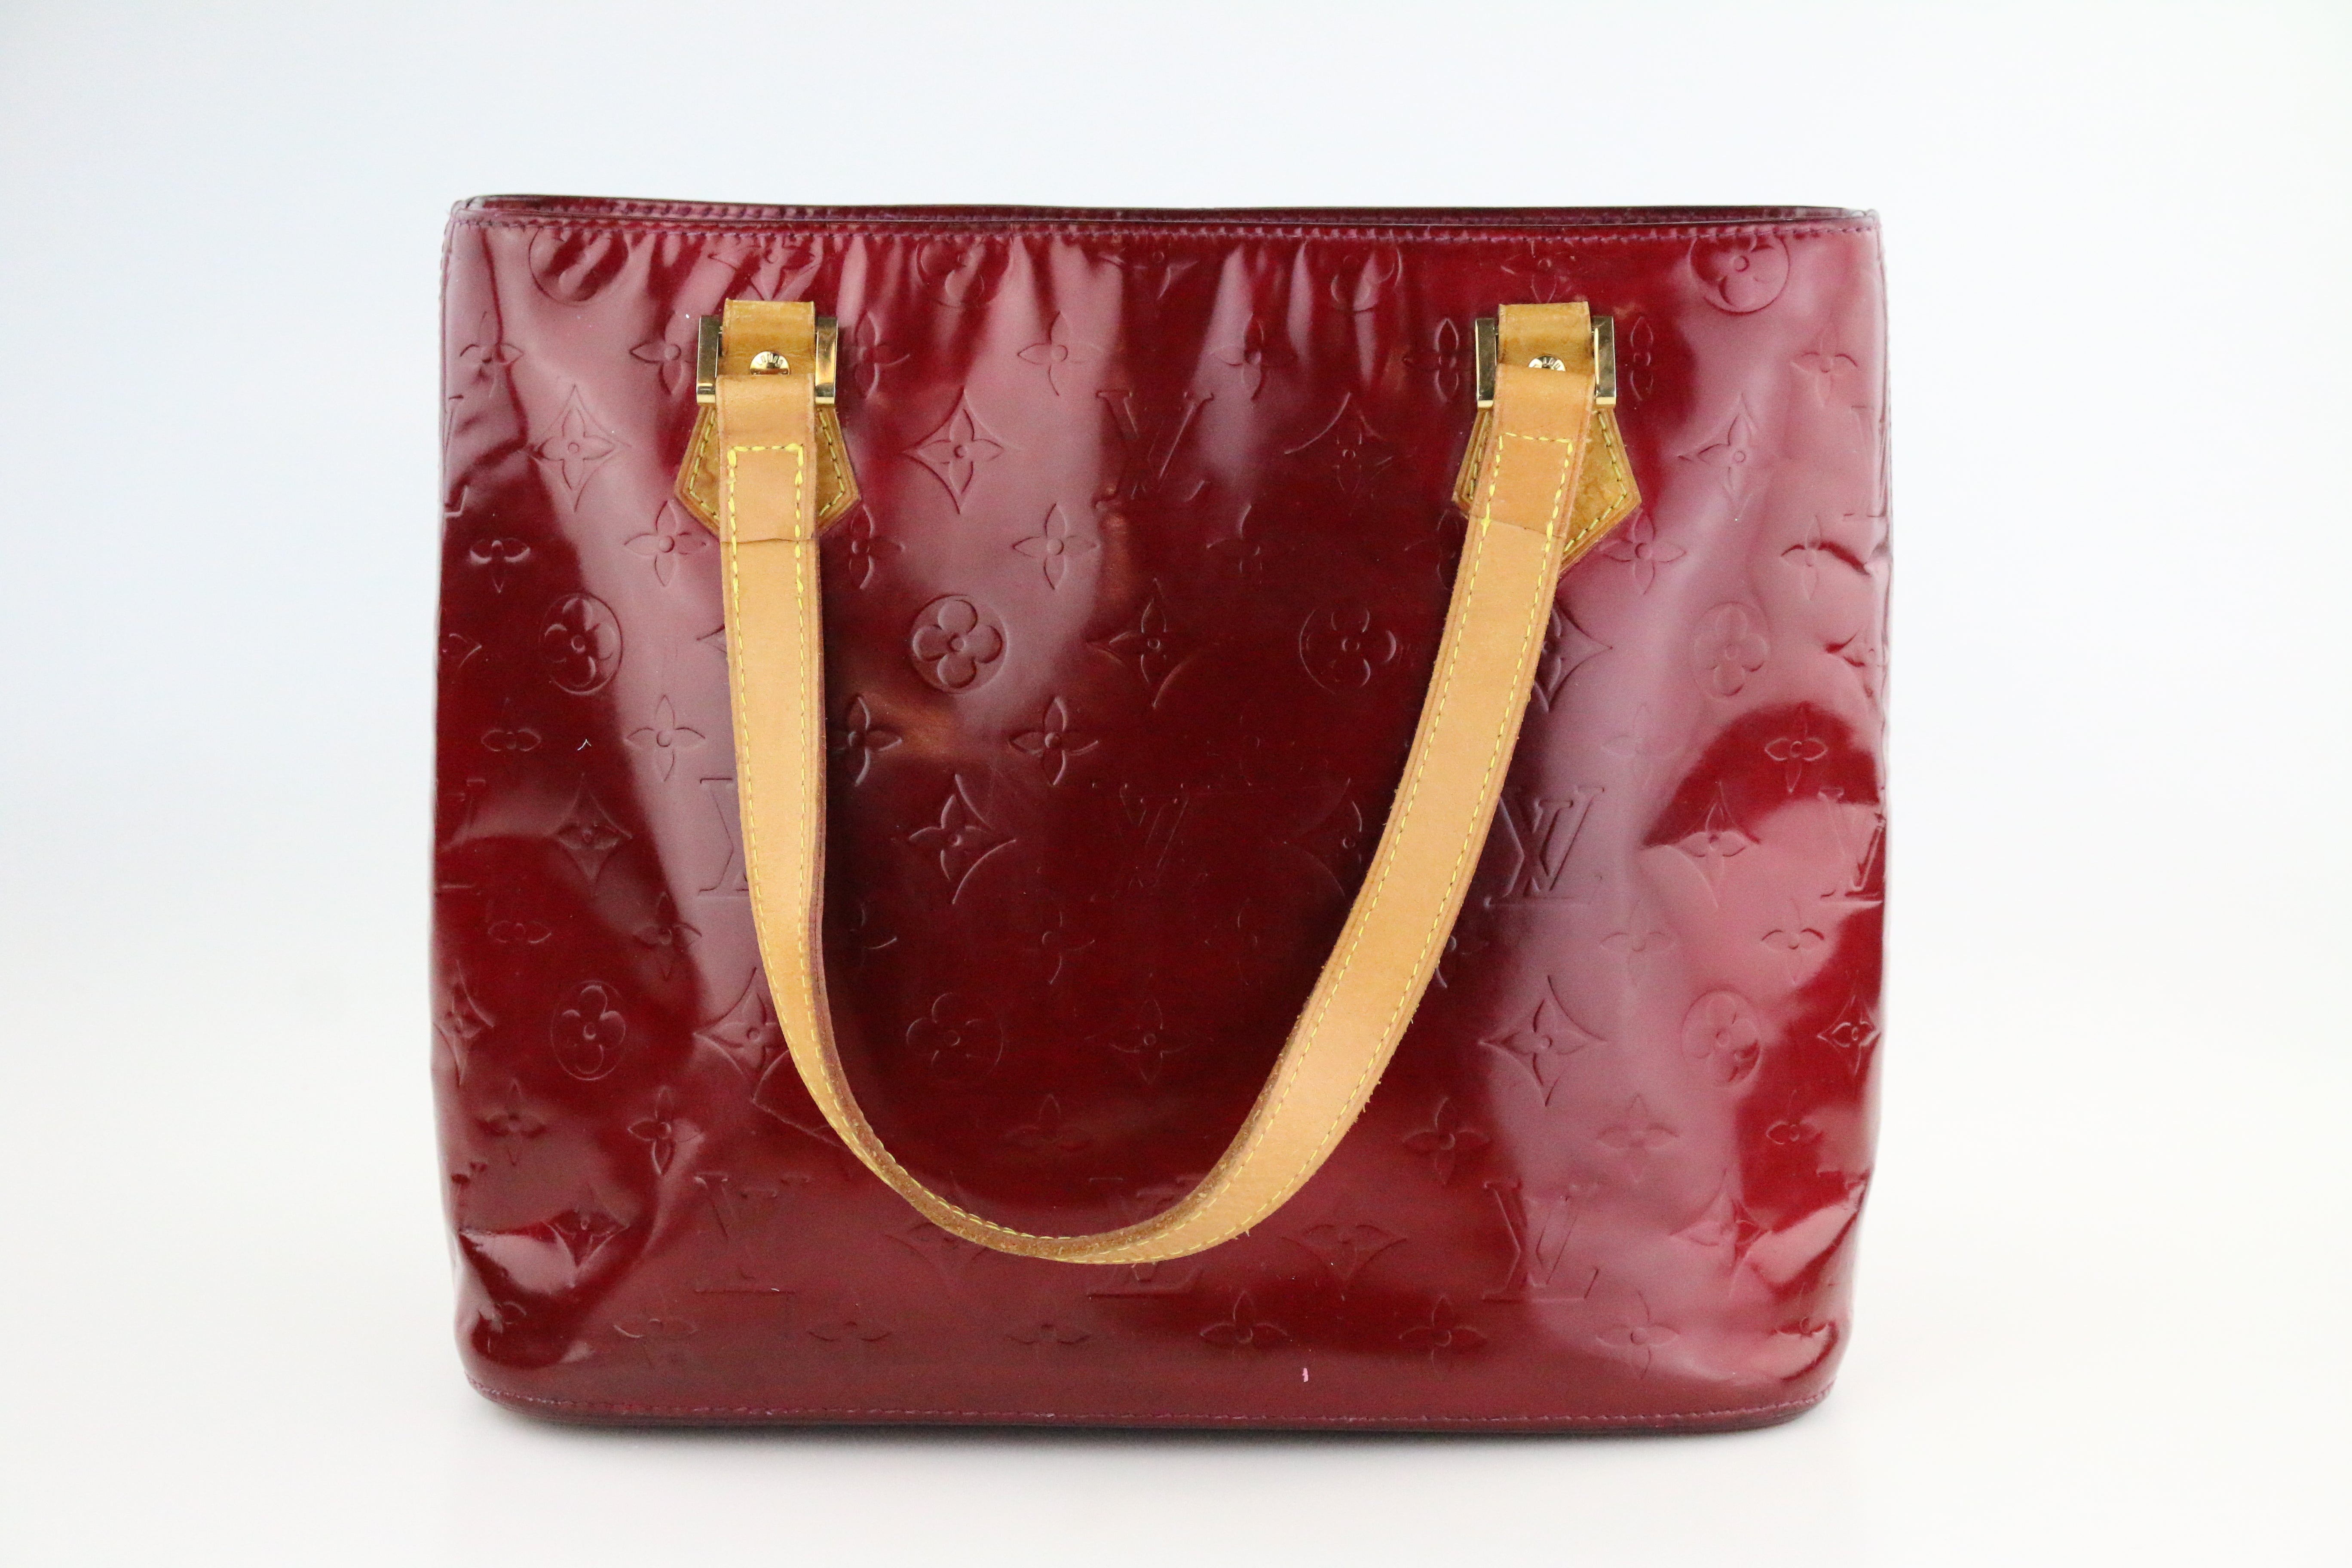 Dying a Louis Vuitton Vernis Leather Handbag (Patent Leather) 